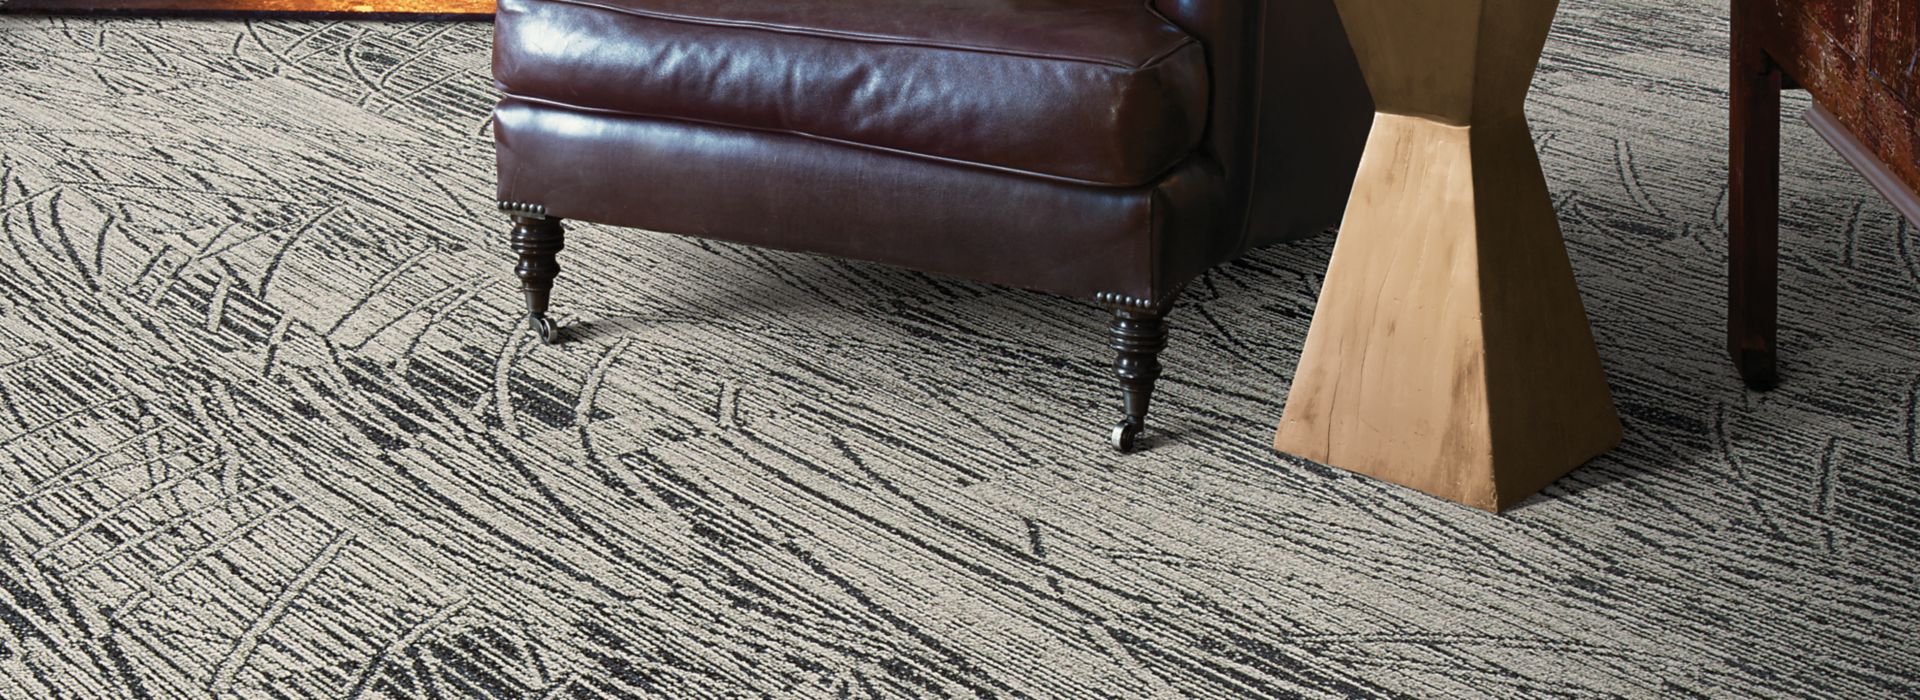 Interface WE152 plank carpet tile in sitting area with fireplace and large leather chair